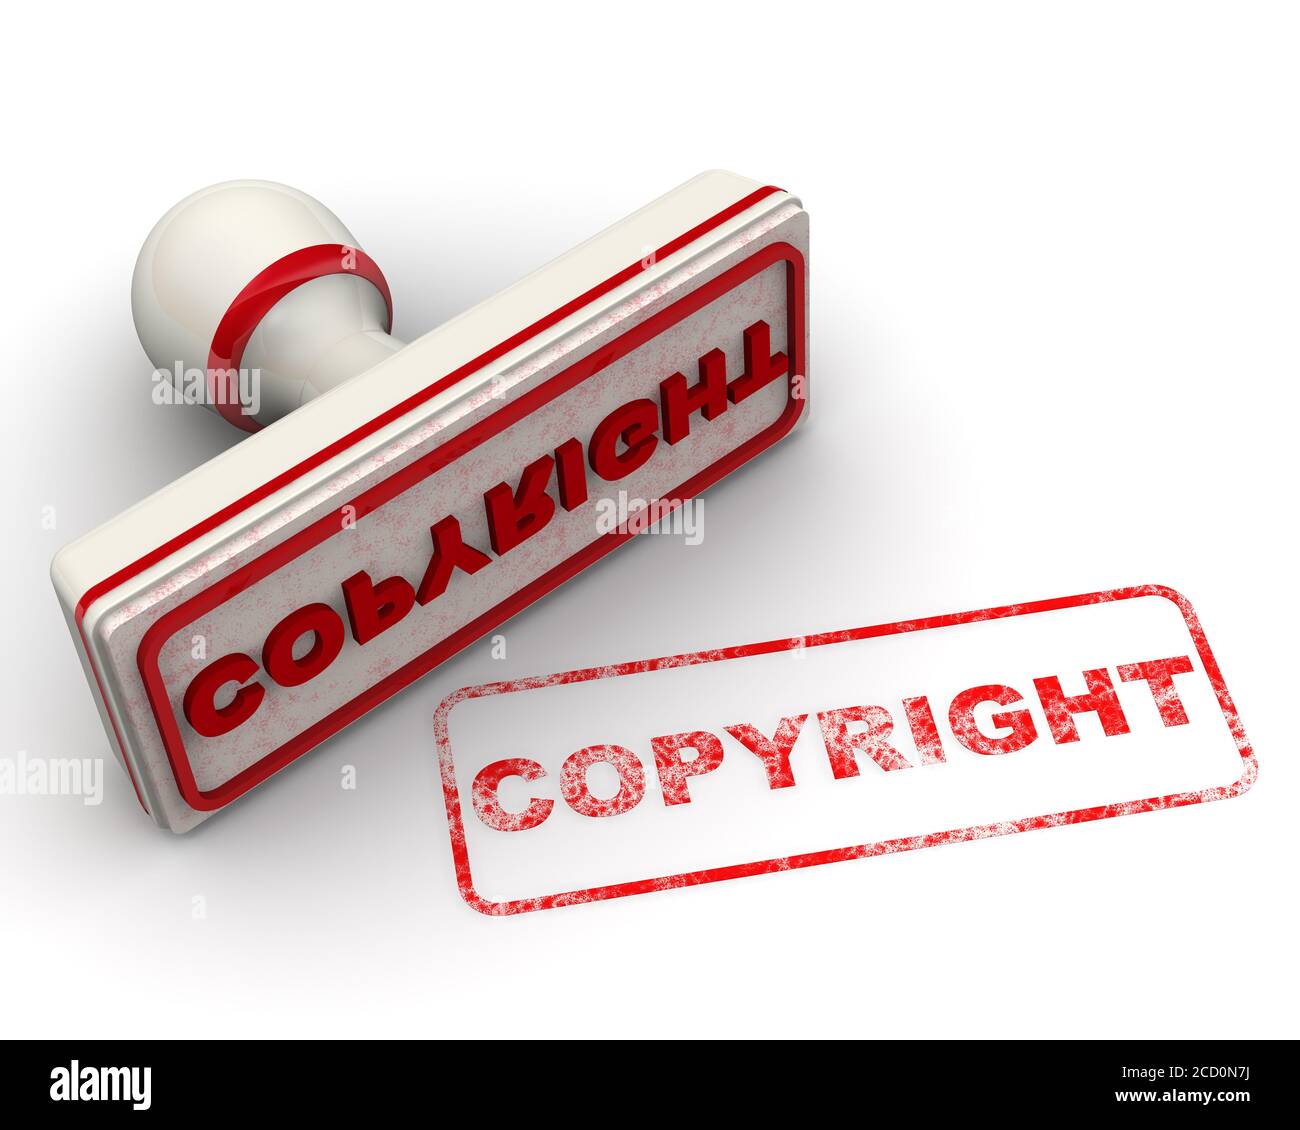 Copyright. The stamp and an imprint. White seal and red imprint COPYRIGHT on white surface. 3D illustration Stock Photo